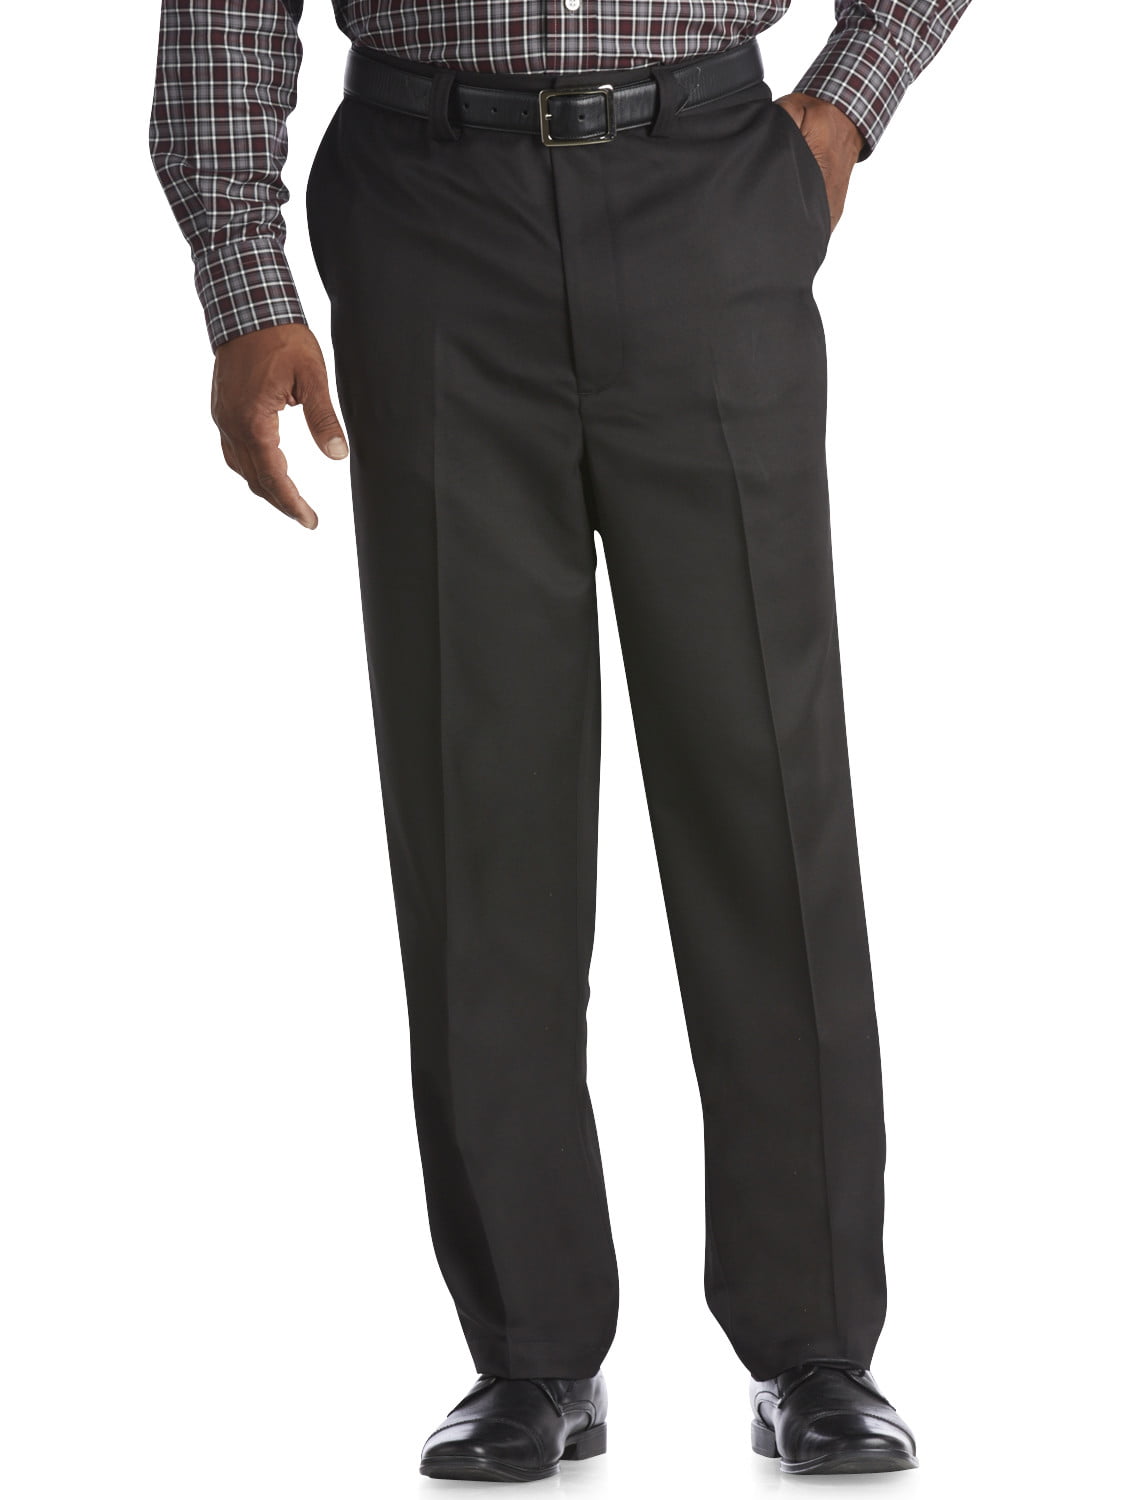 New Improved Fit Oak Hill by DXL Big and Tall Waist-Relaxer Flat-Front Microfiber Pants